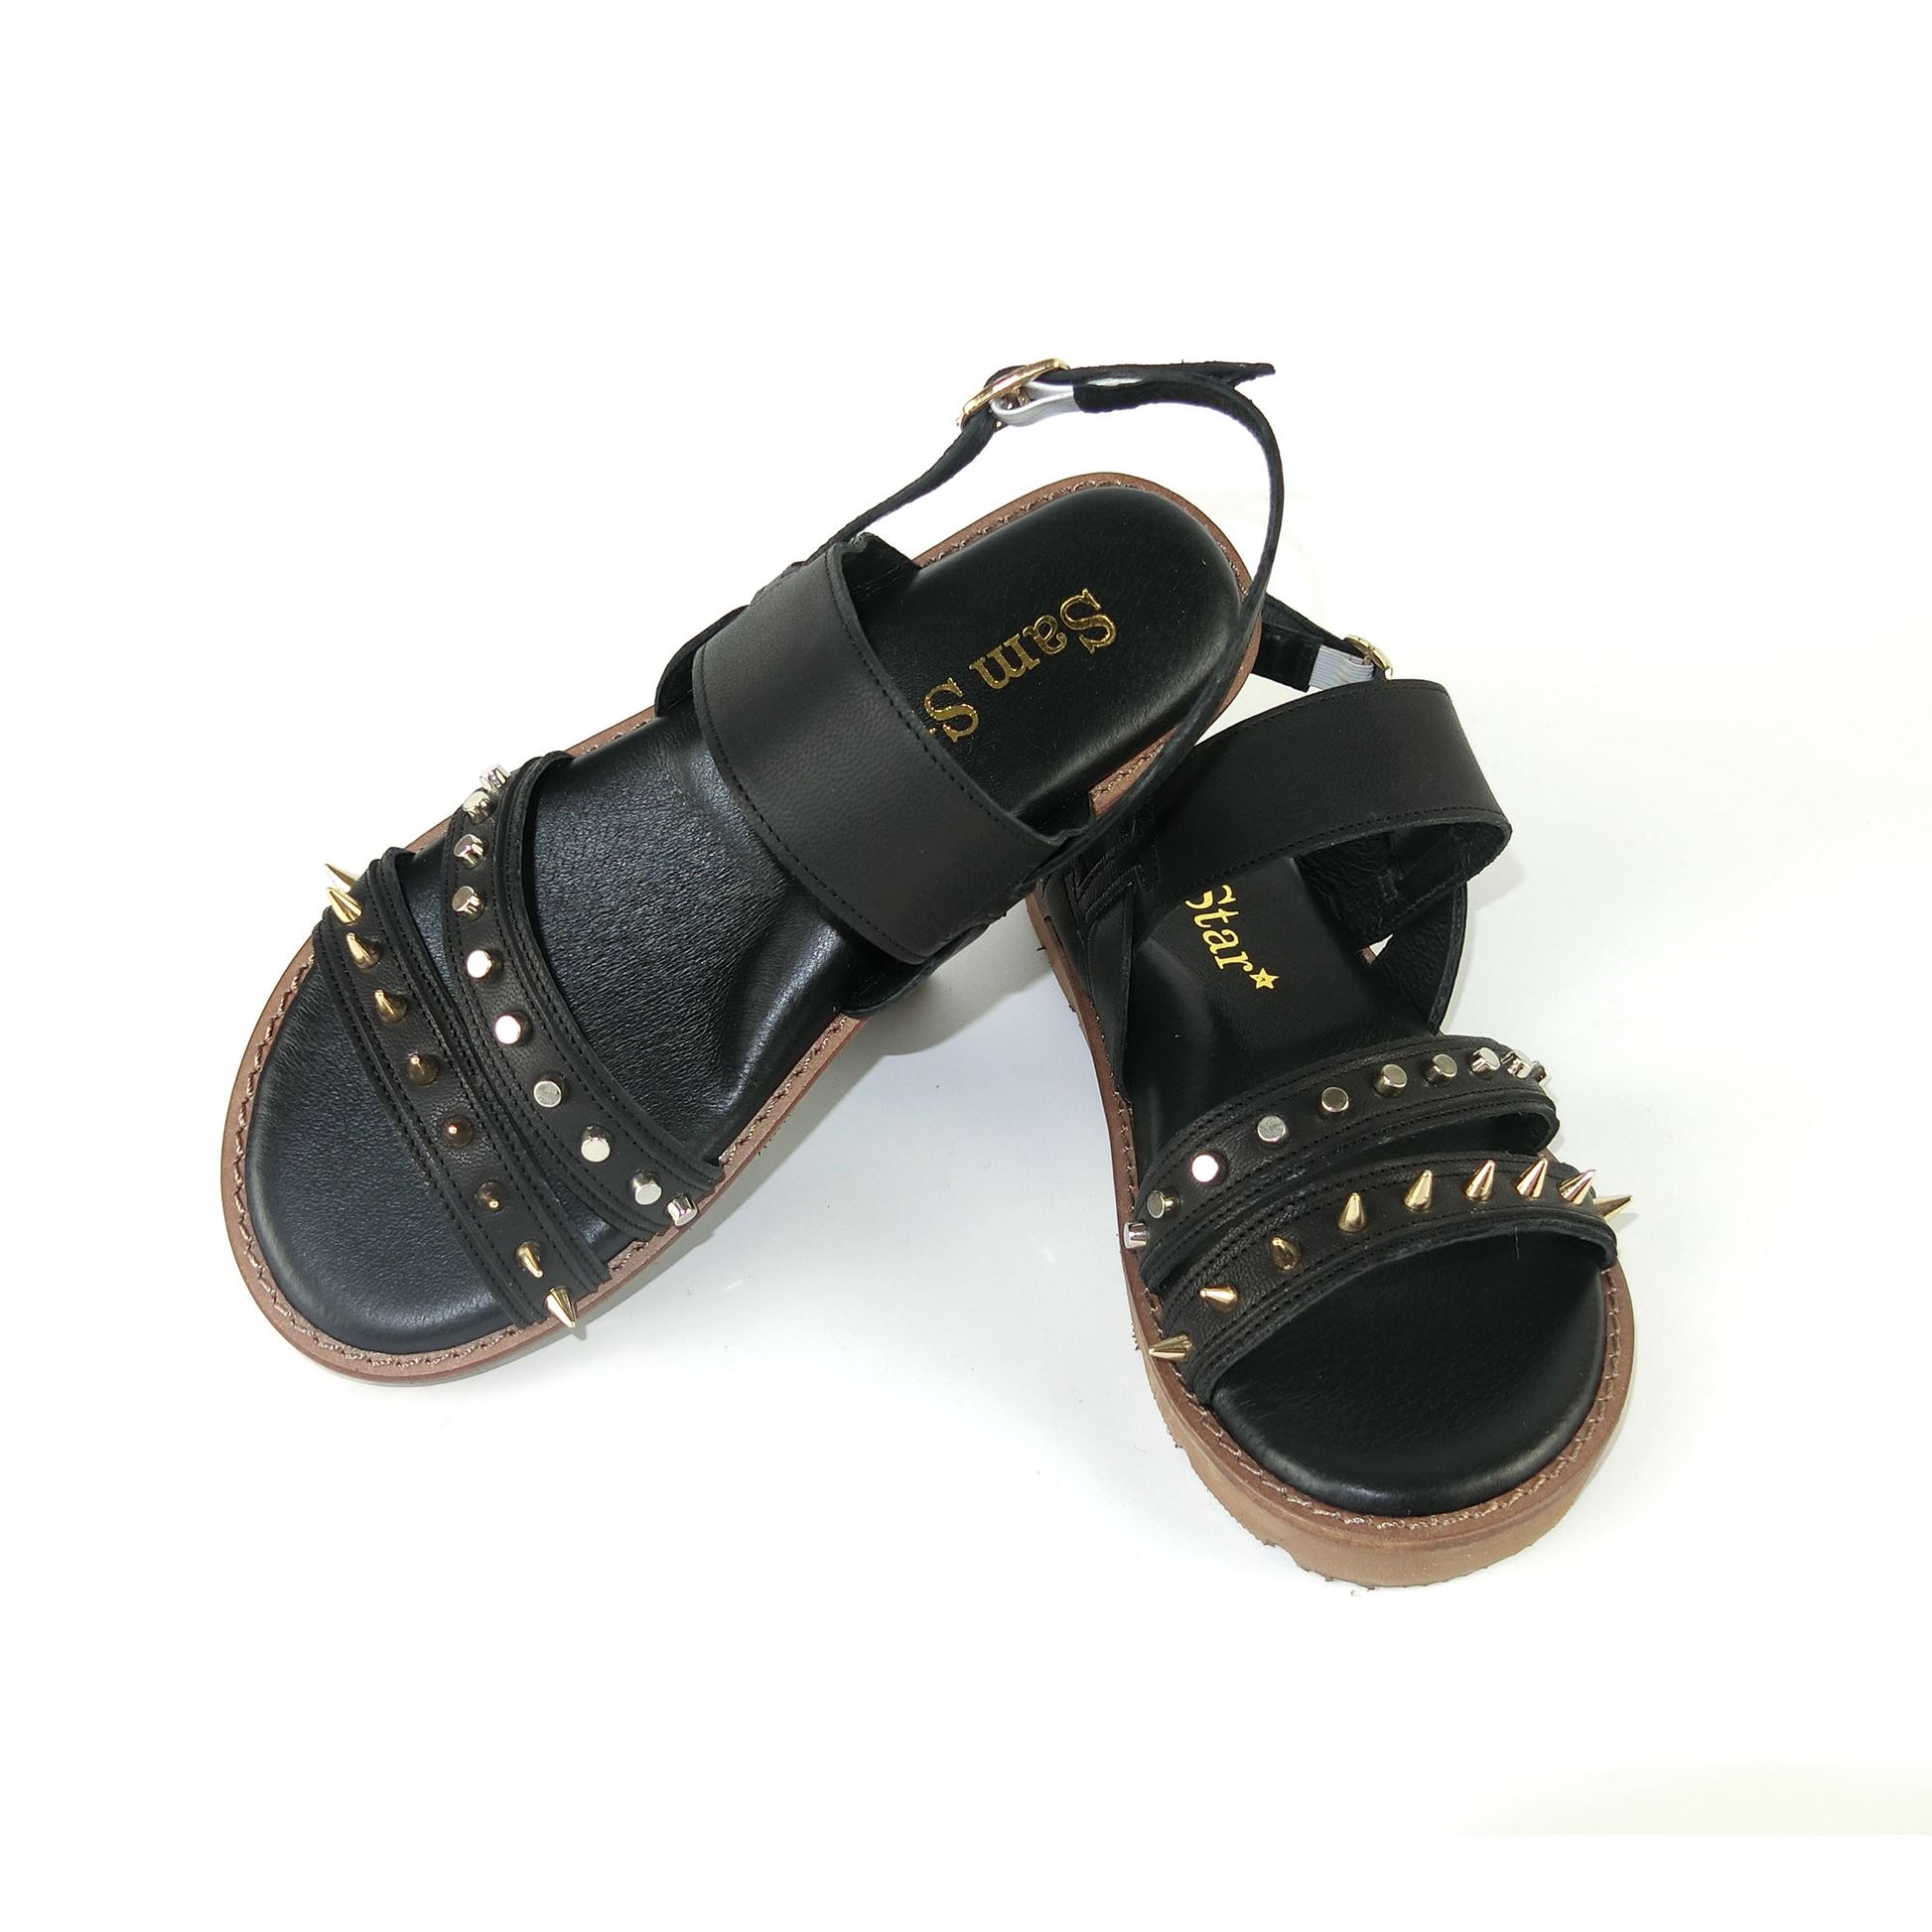 SS22018/19 Leather flat sandals with studs detail Sam Star Shoes Black 5 (38) 